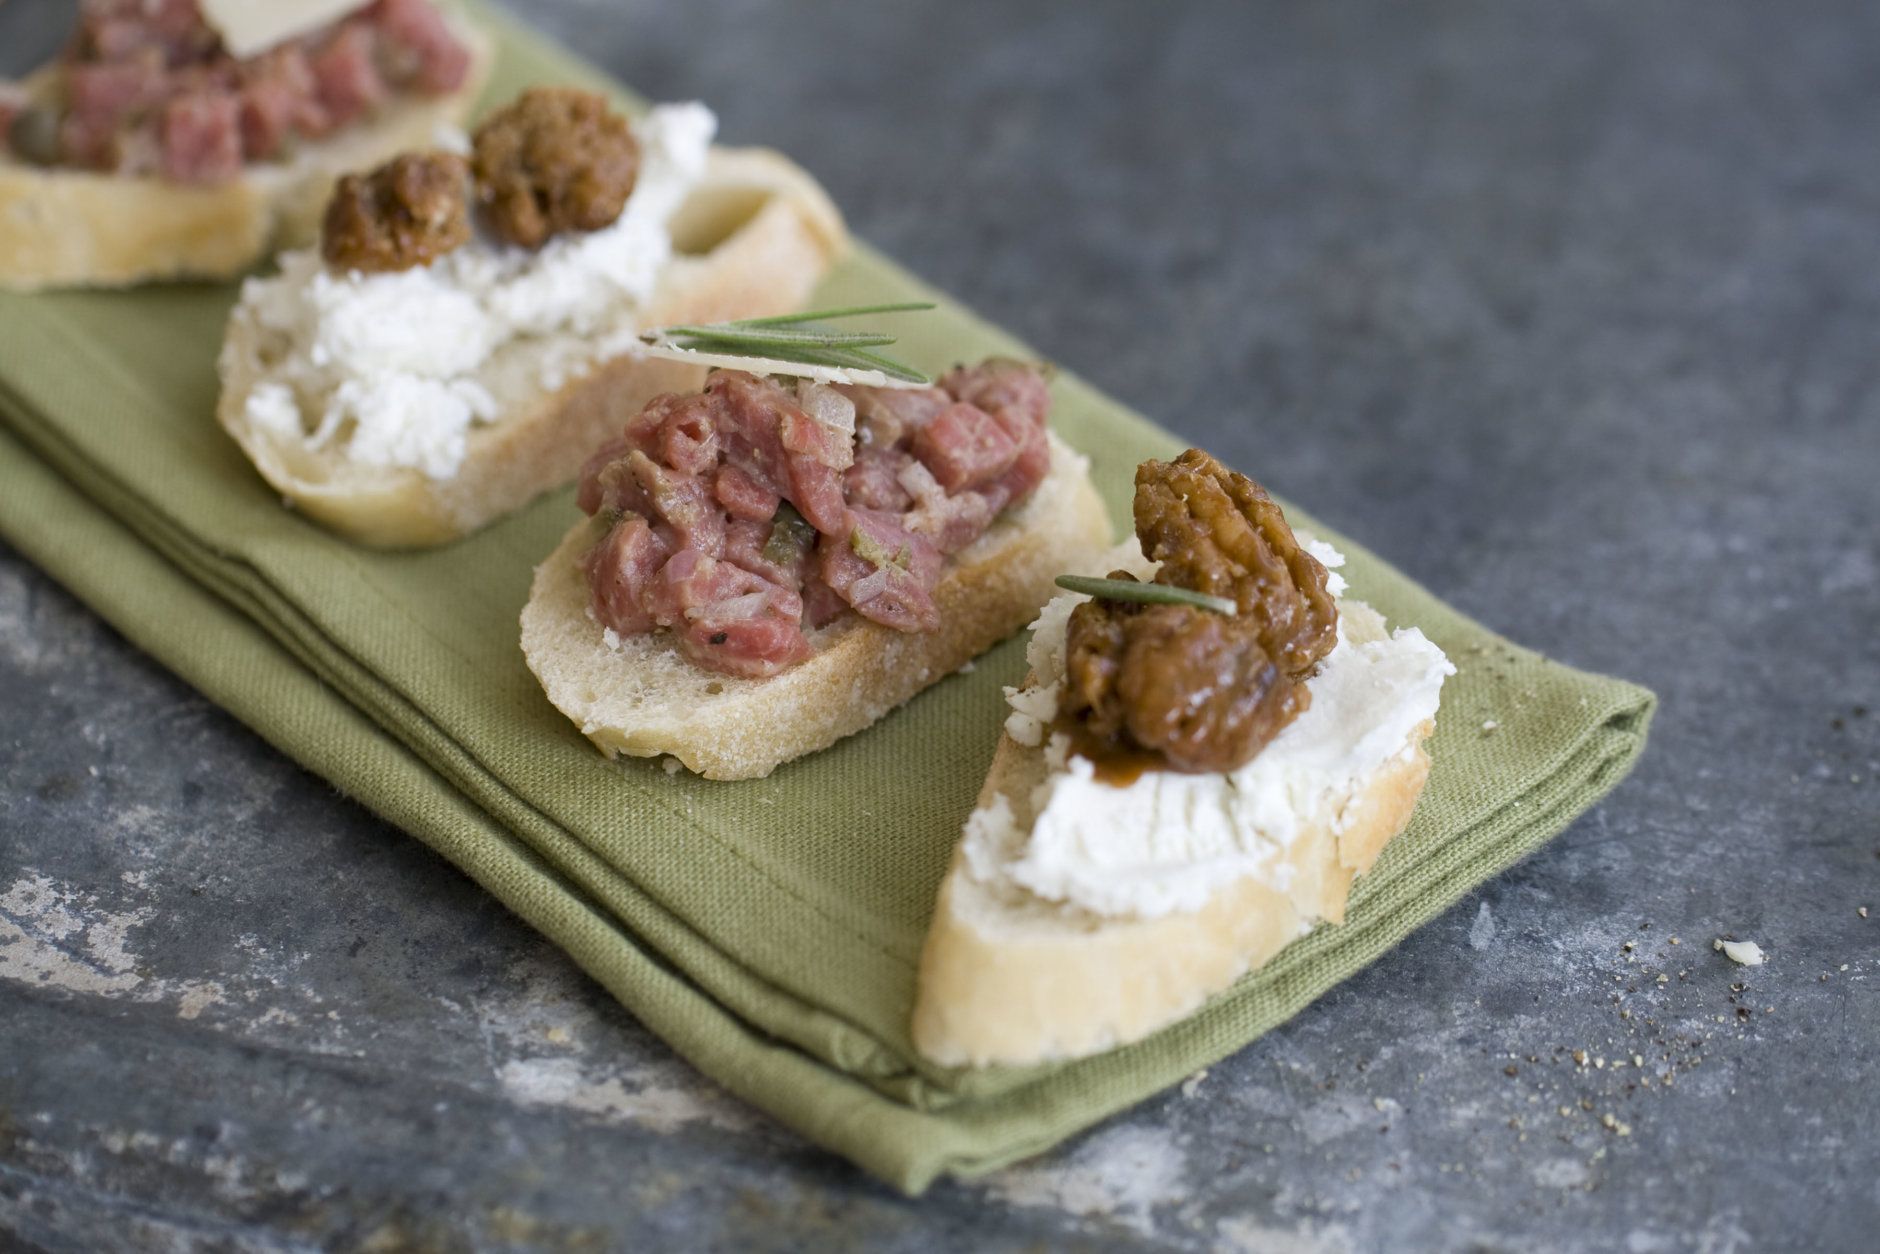 This Oct. 21, 2013 photo shows crostini topped with goat cheese and candied nuts or steak tartare in Concord, N.H. For Thanksgiving, no-cook dishes can be sprinkled throughout the meal. (AP Photo/Matthew Mead)